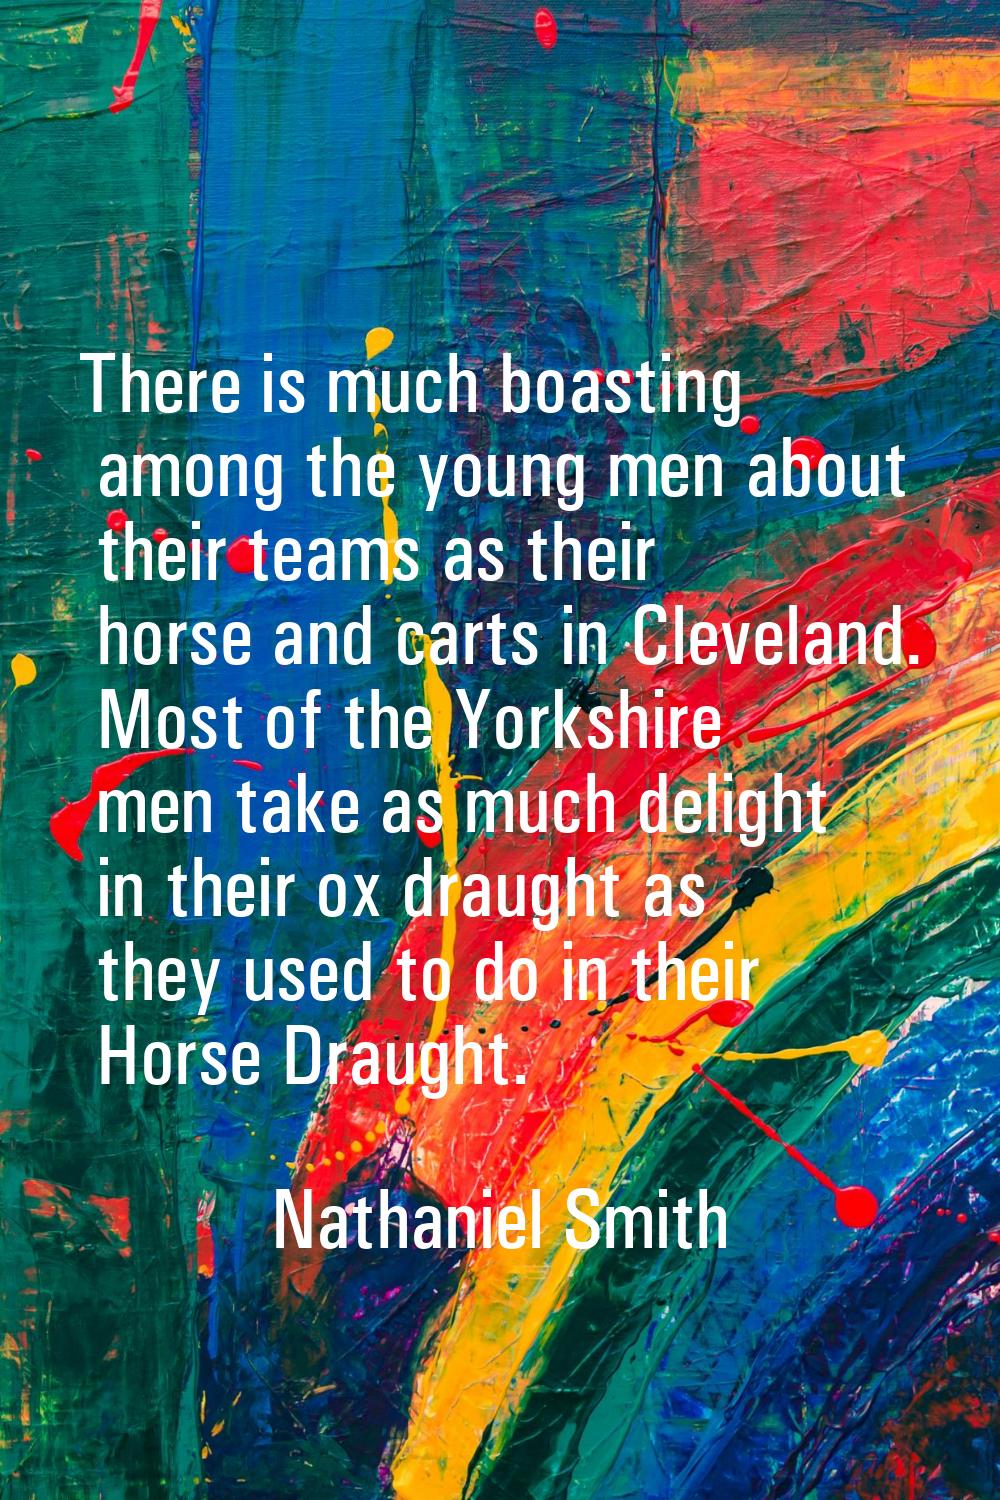 There is much boasting among the young men about their teams as their horse and carts in Cleveland.